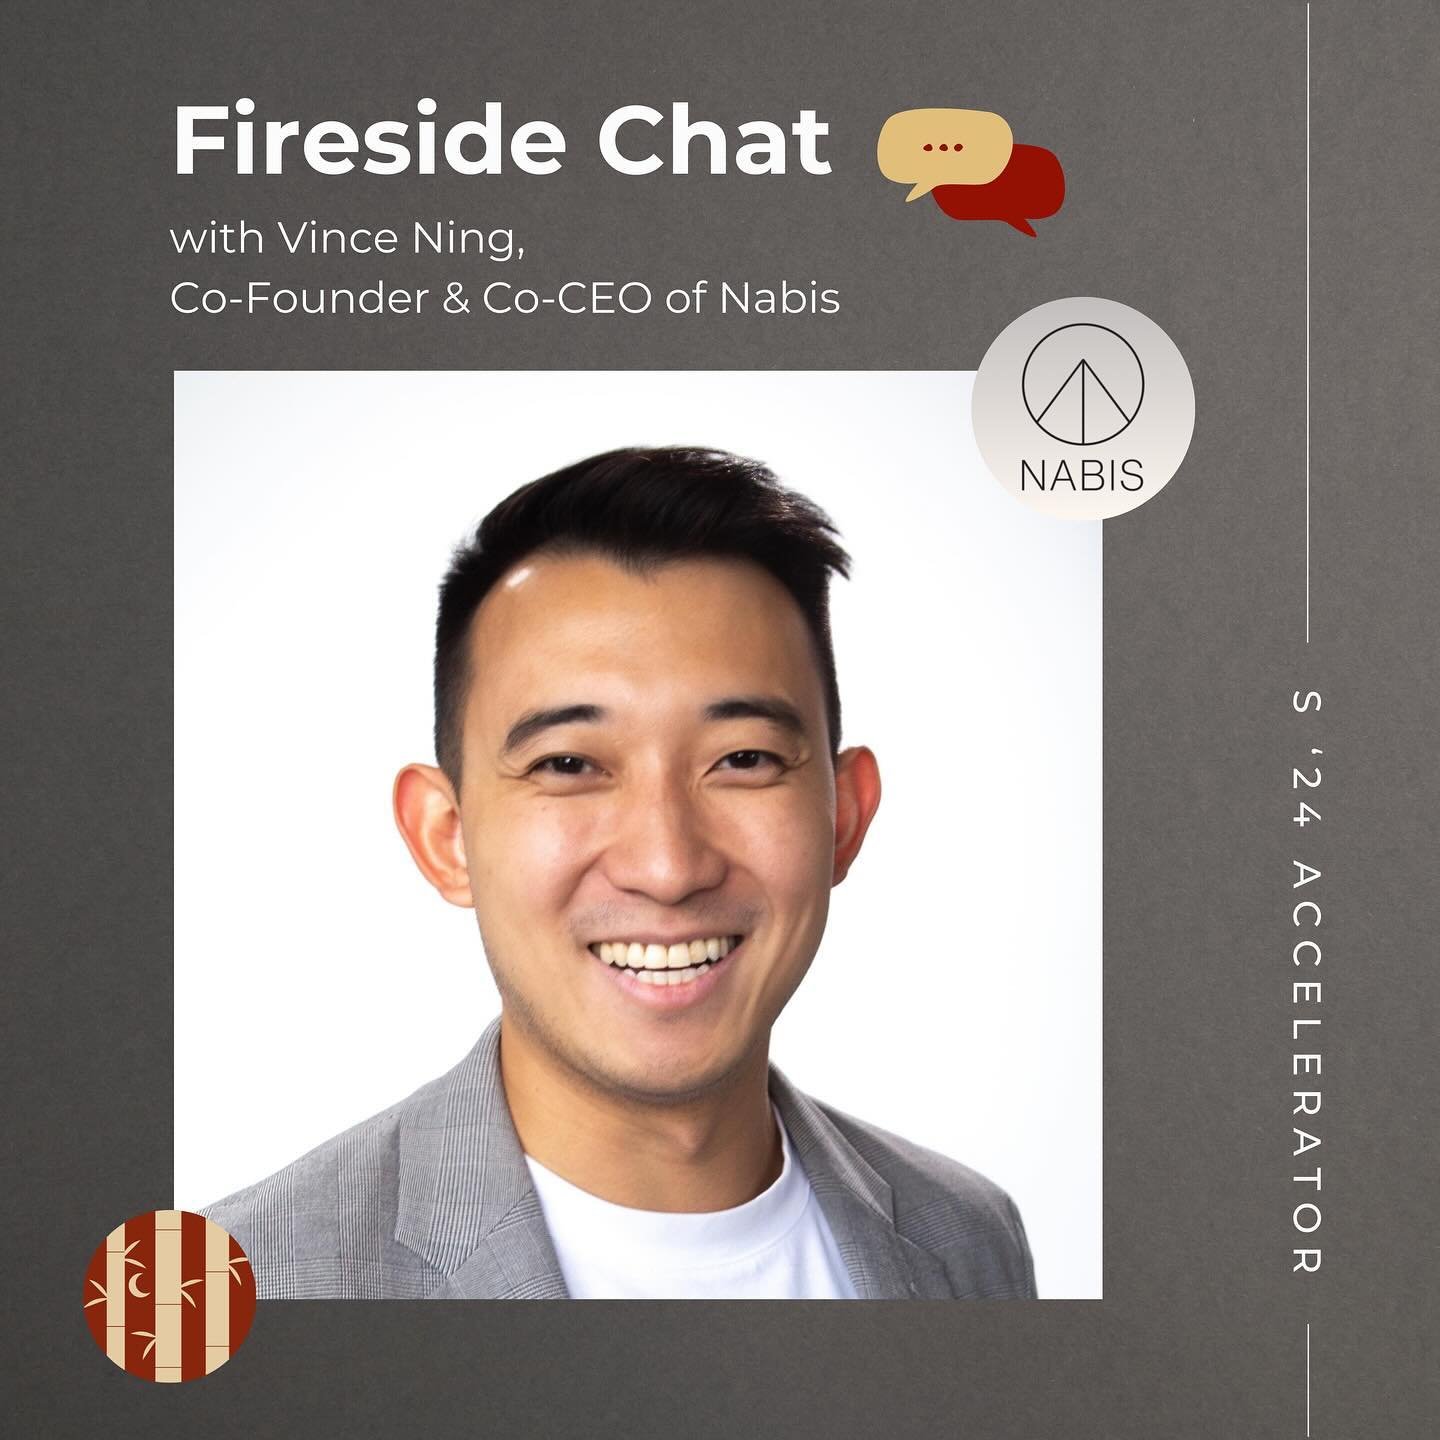 This weekend, we have our first Fireside Chat 🔥☕️ of the S &lsquo;24 accelerator with Vince Ning, Co-CEO &amp; Co-Founder of Nabis, the leading licensed cannabis wholesale platform, improving commerce for over half a billion dollars worth of product